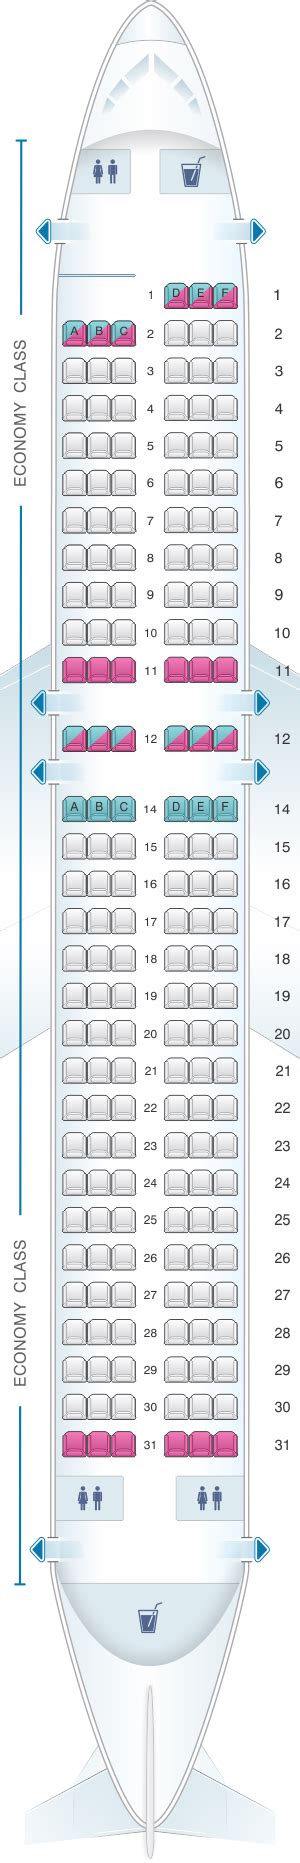 30-34". Pitch. local_pizza. Food & Snacks. Seat 10A is a standard economy window seat with 30-34" of seat pitch, which is average across Airbus A320's worldwide.